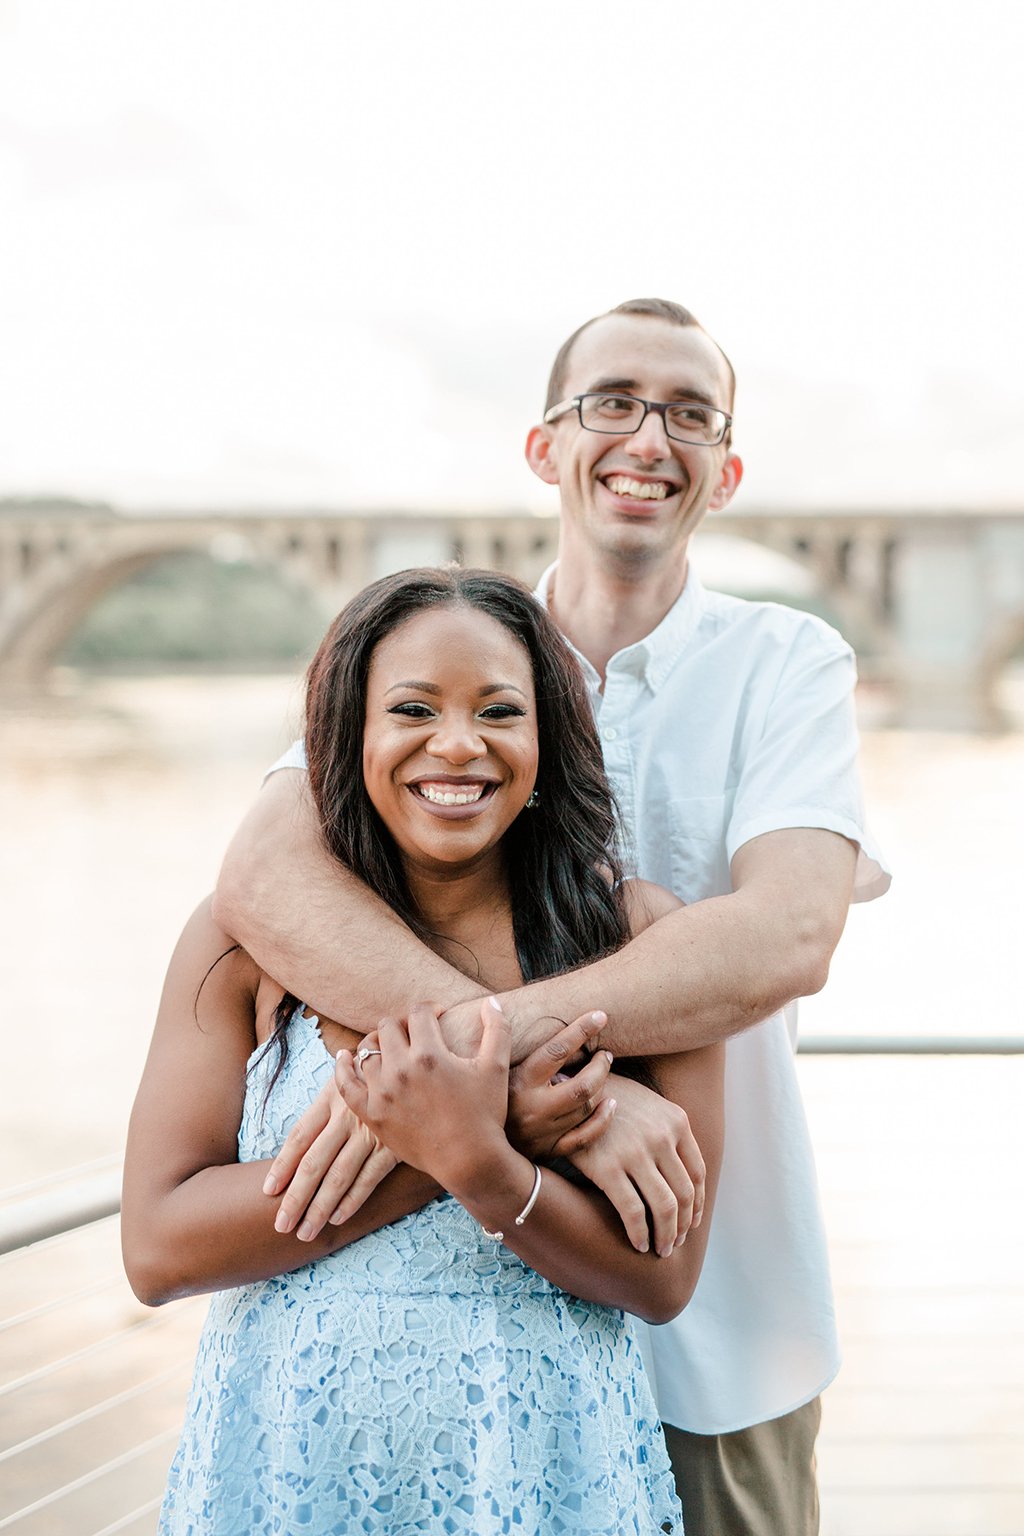 Magic Hour Engagement Photoshoot at the Historic Georgetown Canals and Waterfront Brooke McClure Daniel Scott